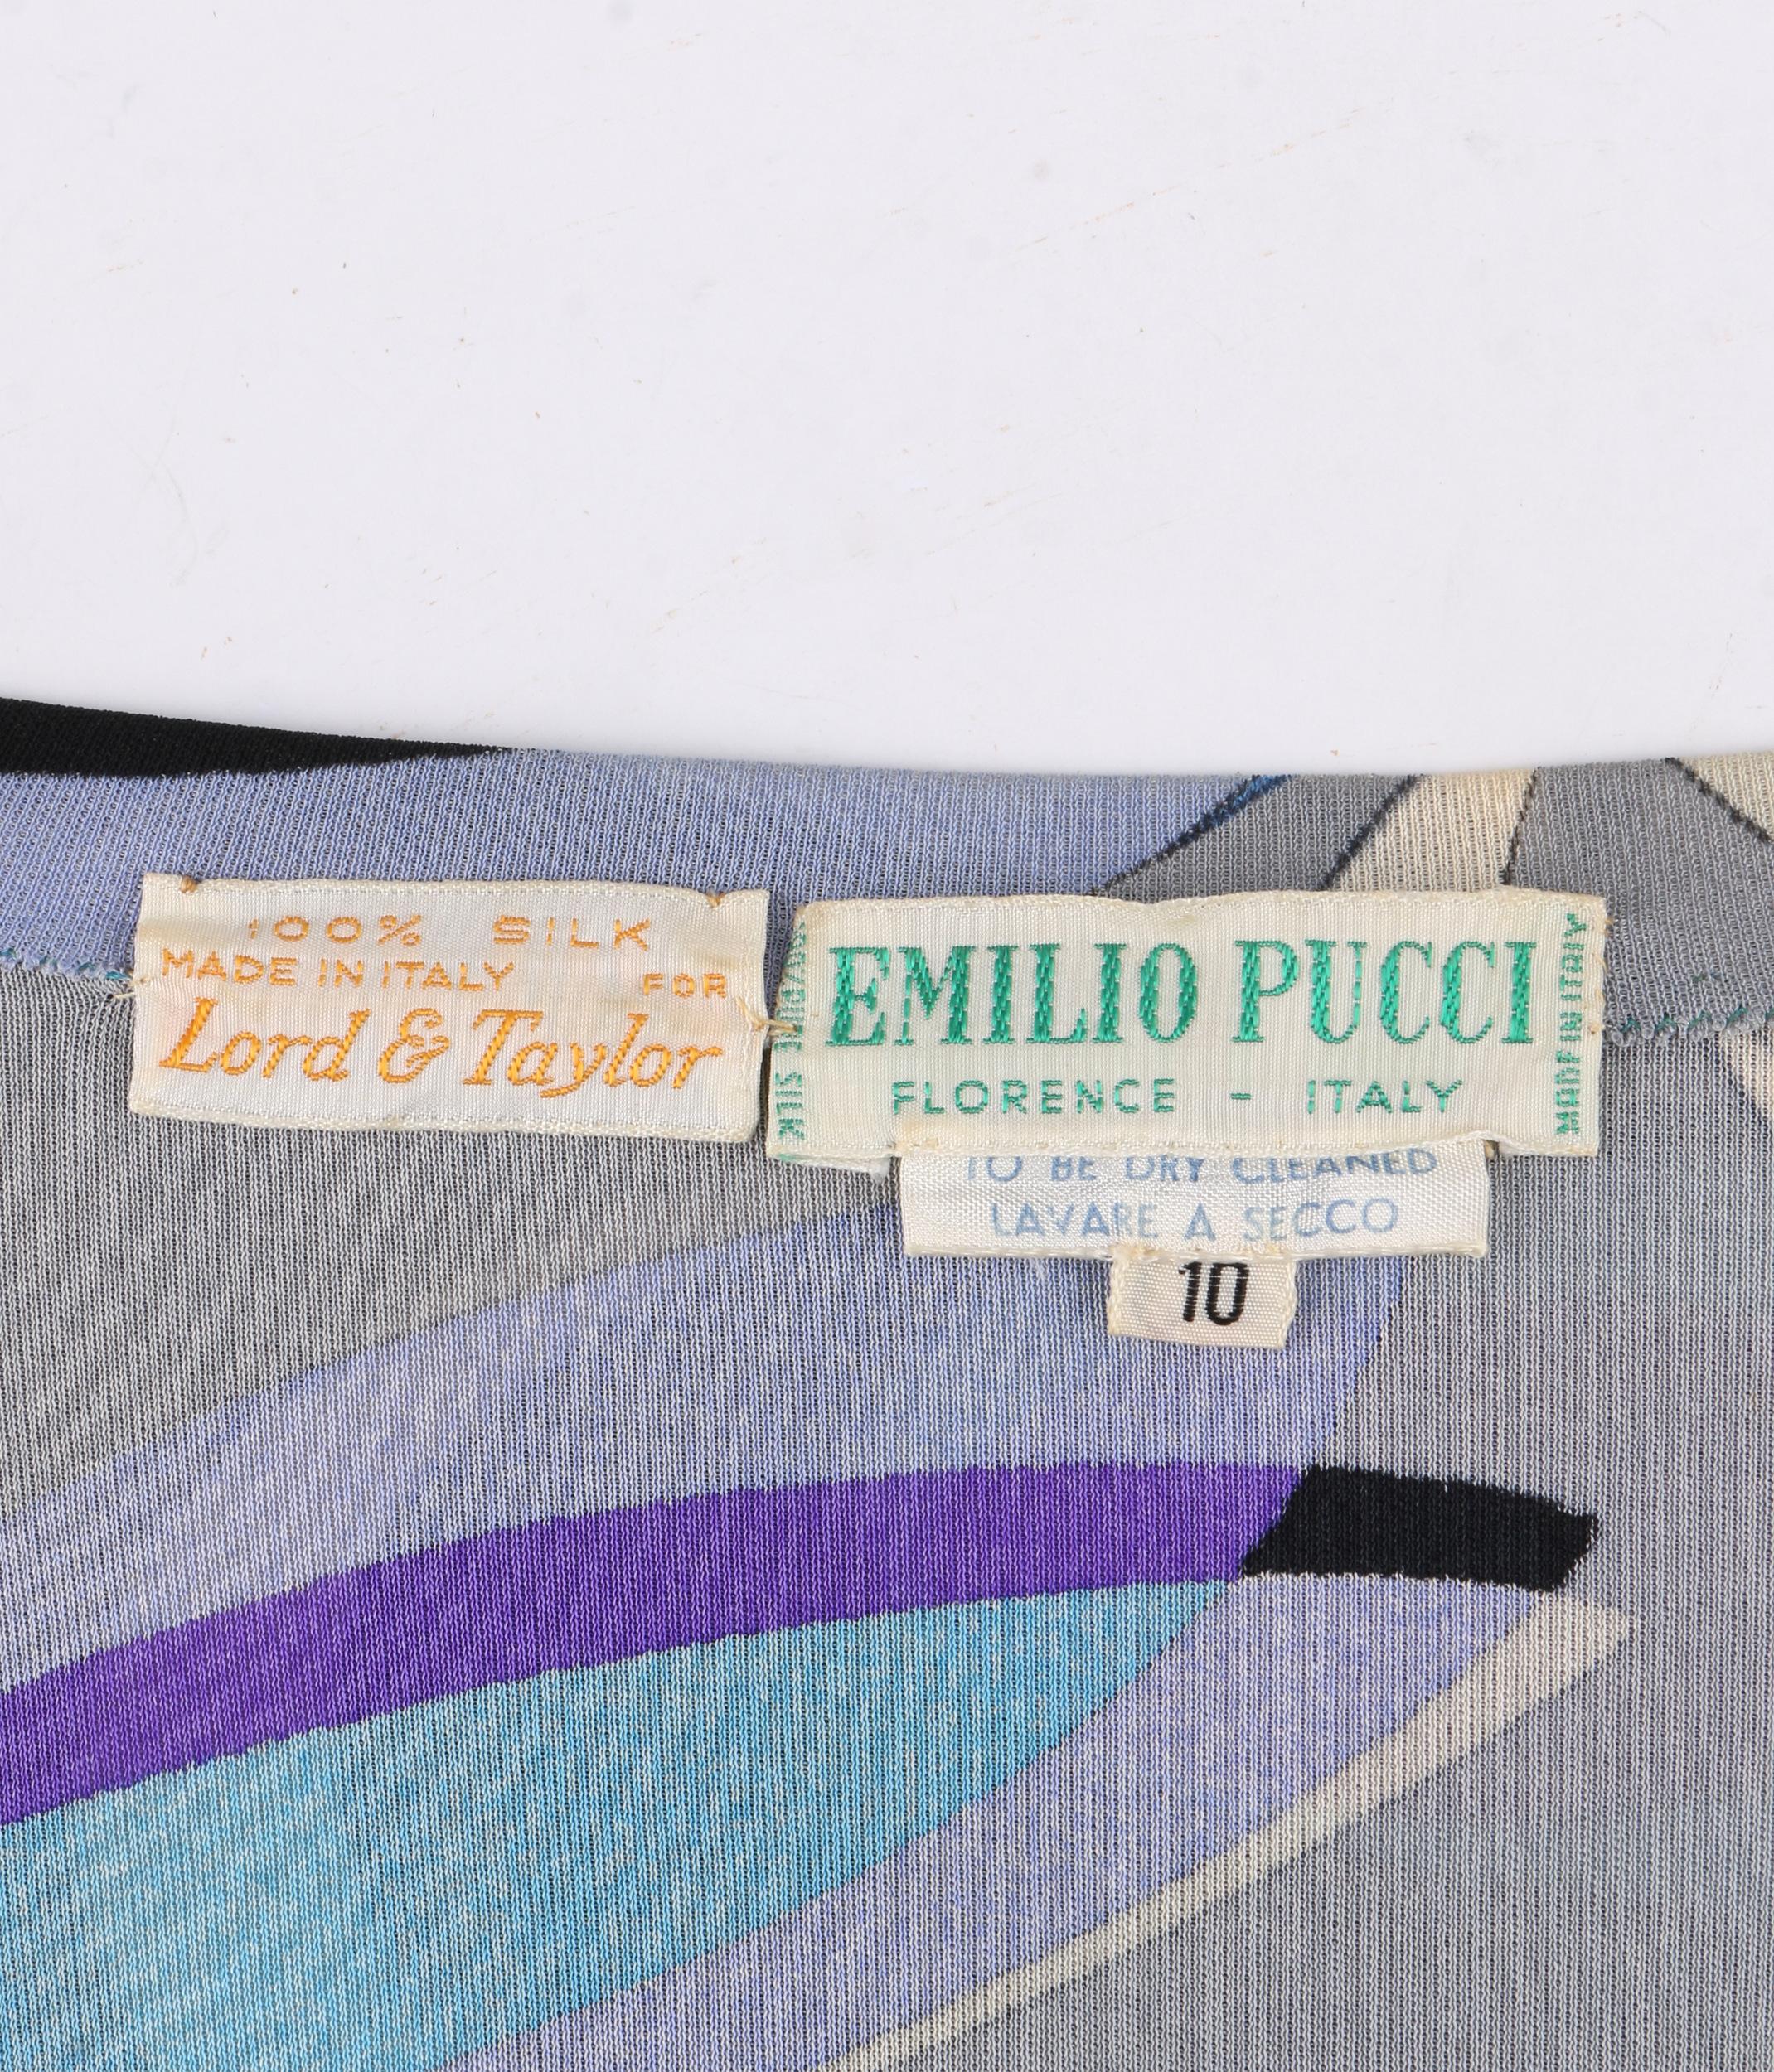 EMILIO PUCCI c.1960’s Mod Op Art Signature Print Silk Jersey Knit Wedge Dress In Good Condition For Sale In Thiensville, WI